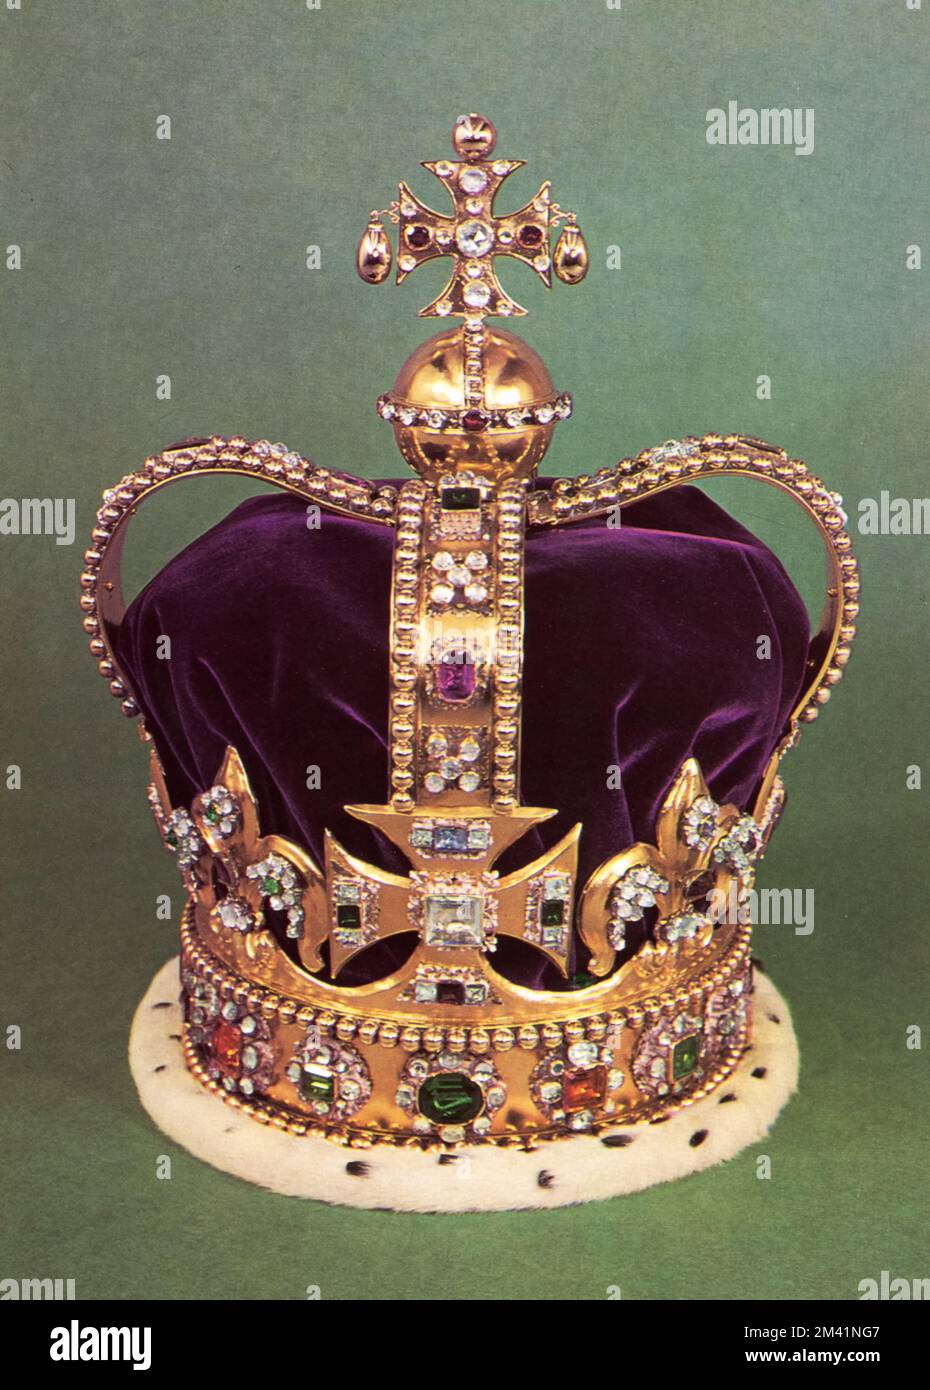 St Edward's Crown. St Edward's Crown is the centrepiece of the Crown Jewels of the United Kingdom. Named after Saint Edward the Confessor (c1003-1066), versions of it have traditionally been used to crown English and British monarchs at their coronations since the 13th century. The original crown was a holy relic kept at Westminster Abbey, Edward's burial place, until the regalia were either sold or melted down when Parliament abolished the monarchy in 1649, during the English Civil War. The current St Edward's Crown was made for Charles II in 1661. Stock Photo